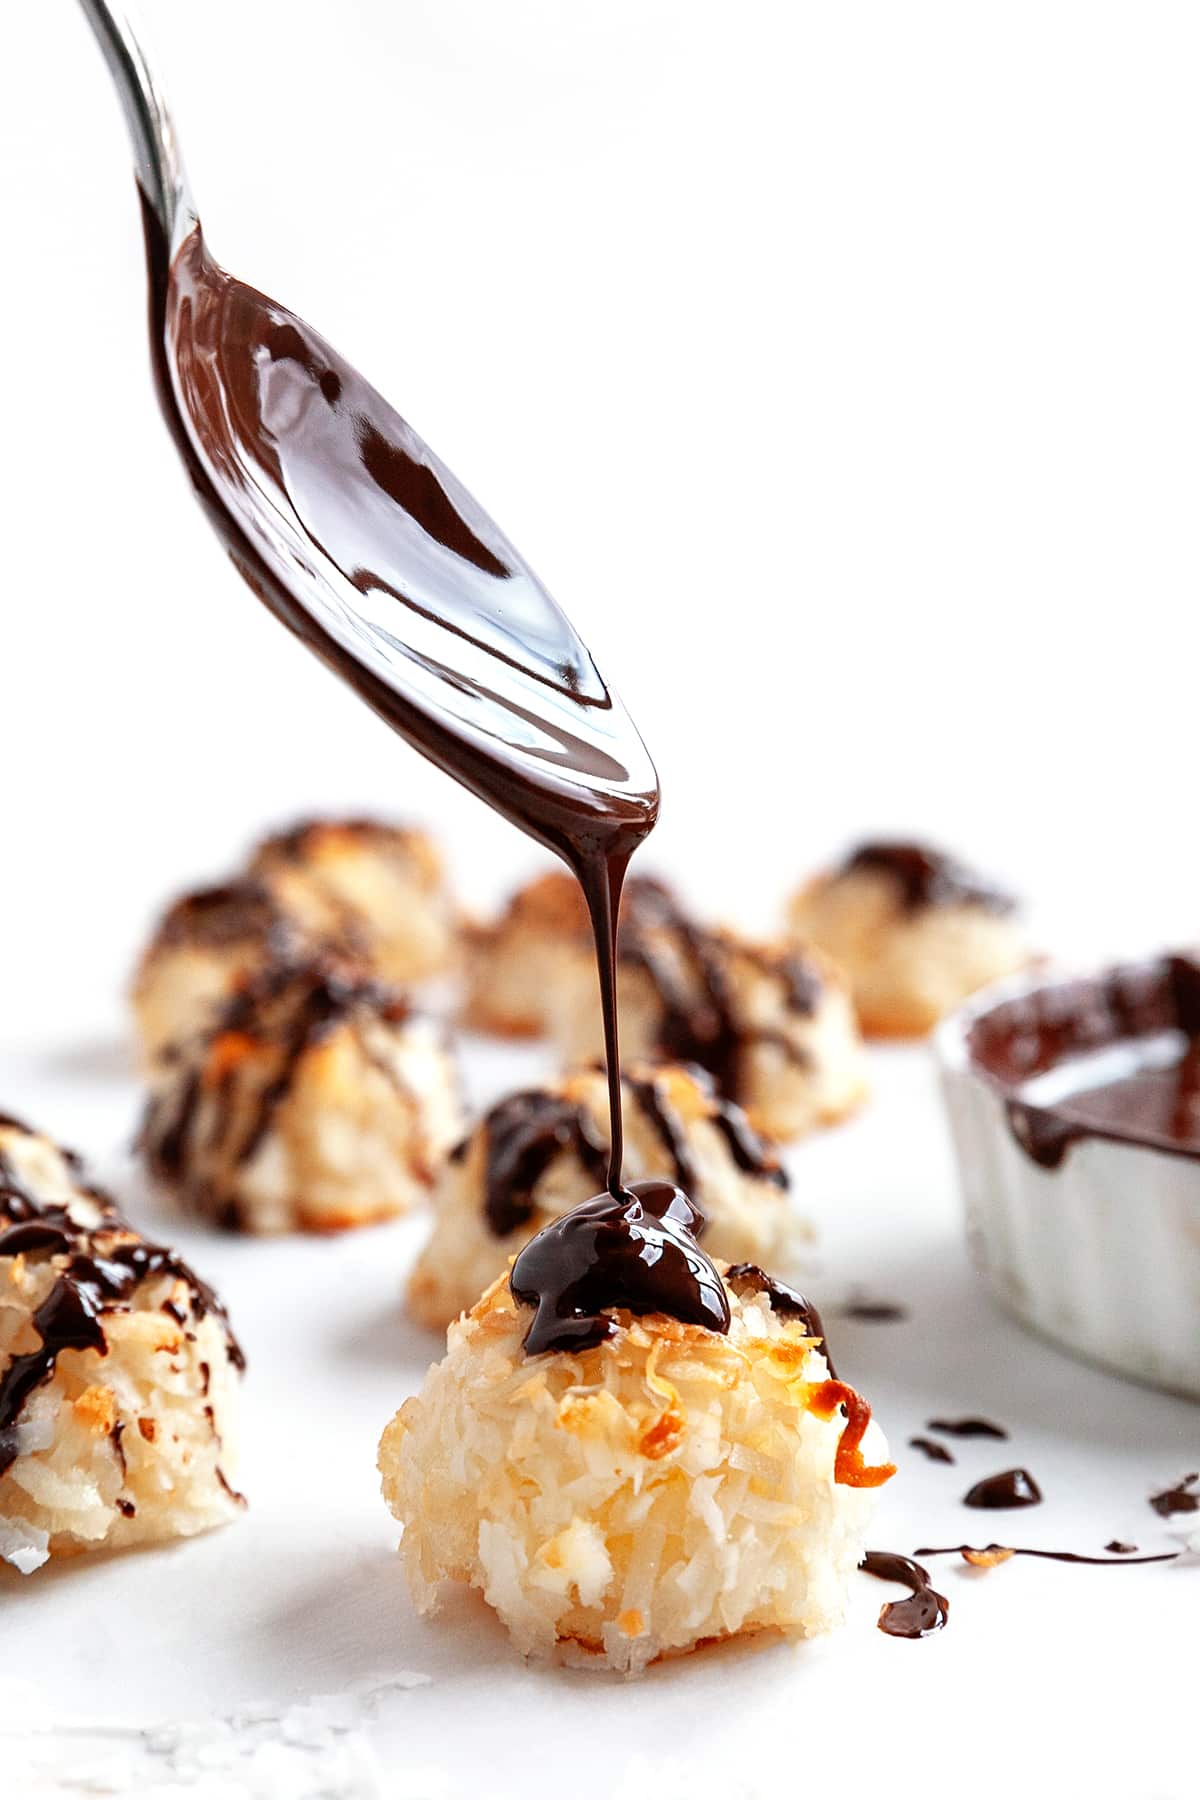 Showing a spoon drizzling on chocolate to a macaroon. 